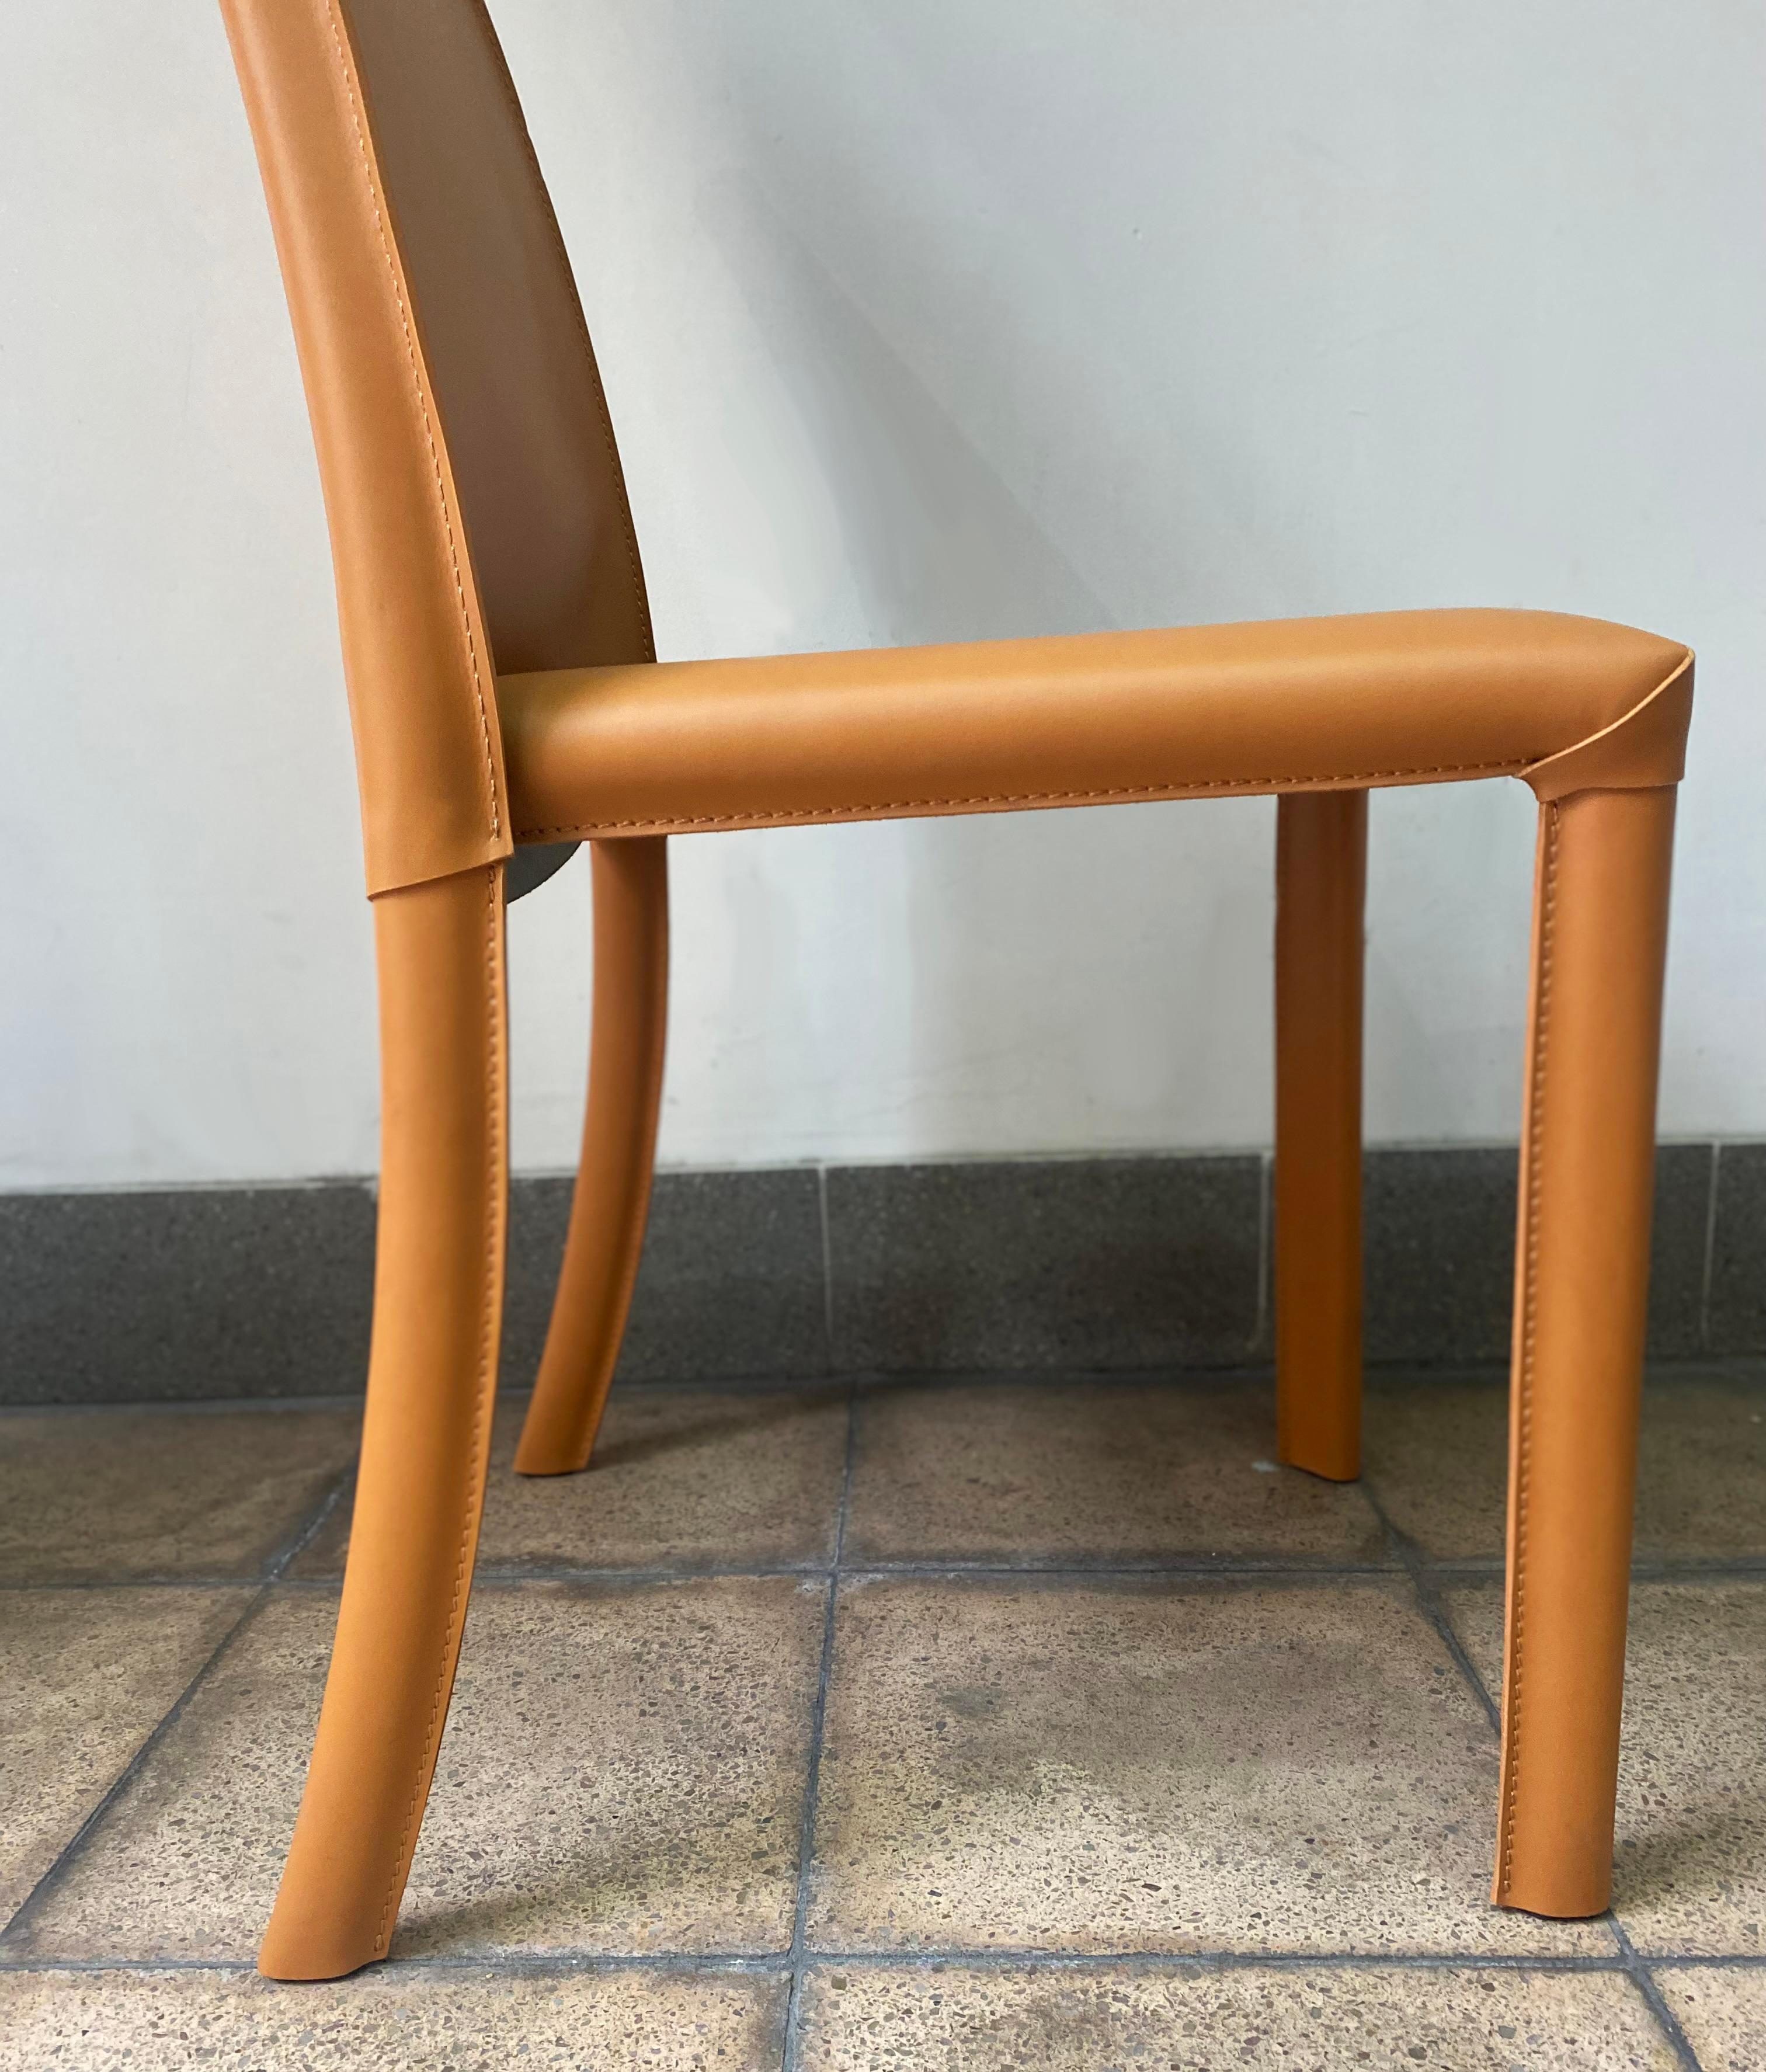 Poltrona Frau, Pair of Frag Chairs Fawn Leather For Sale 3